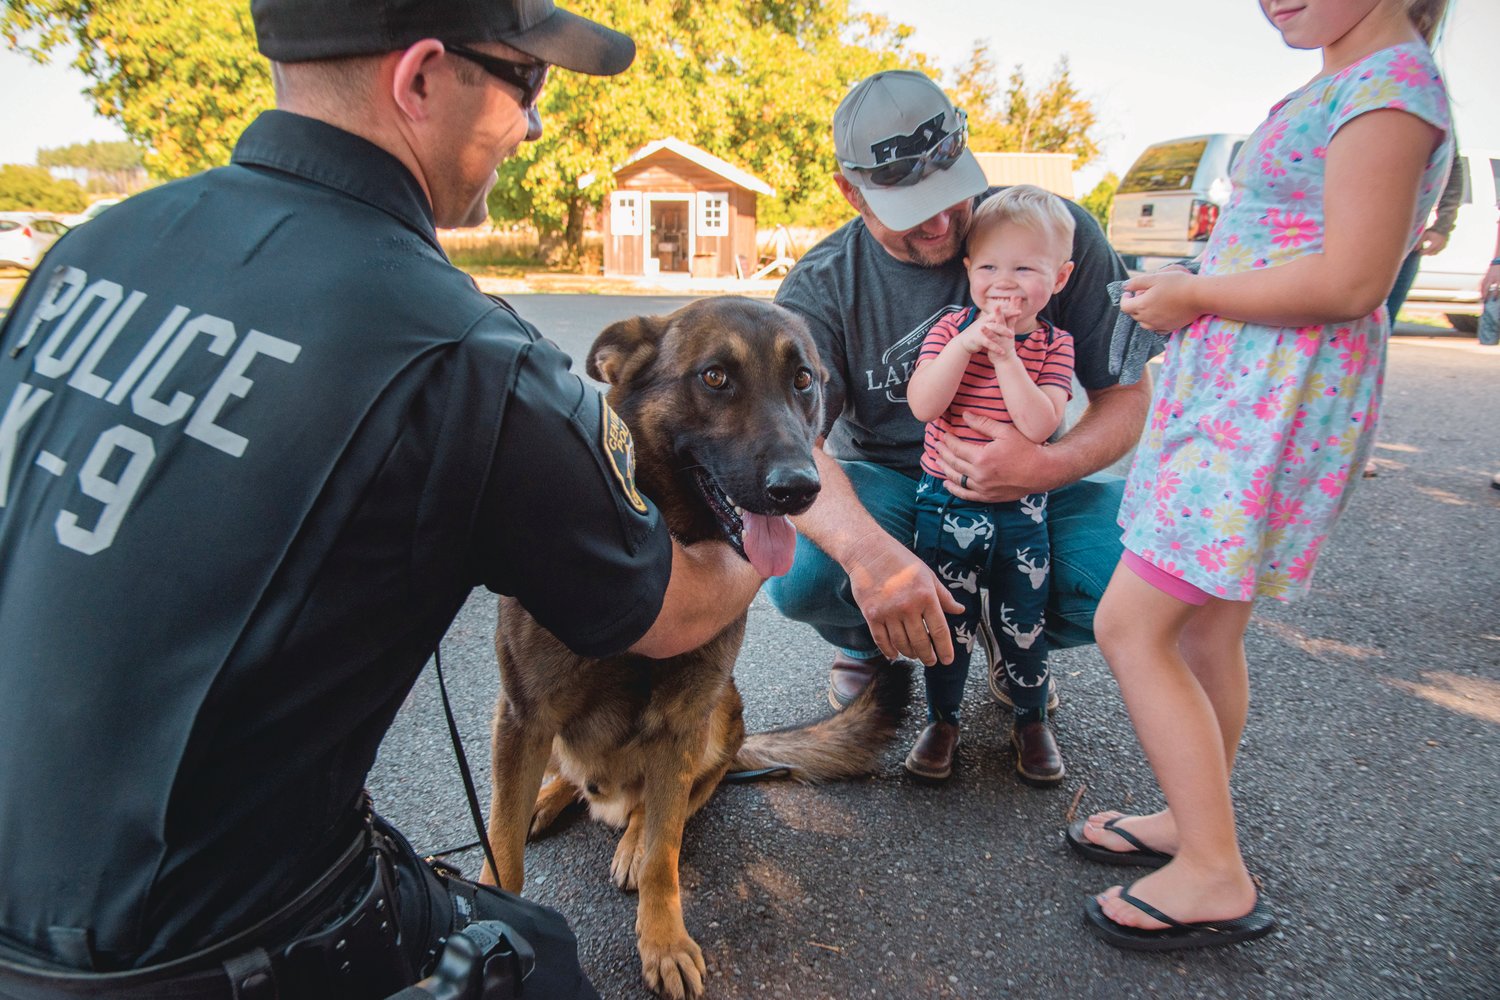 K-9 officer Stephen Summers brings out Samson to meet kids during a “Back the Blue” event in Adna on Saturday.